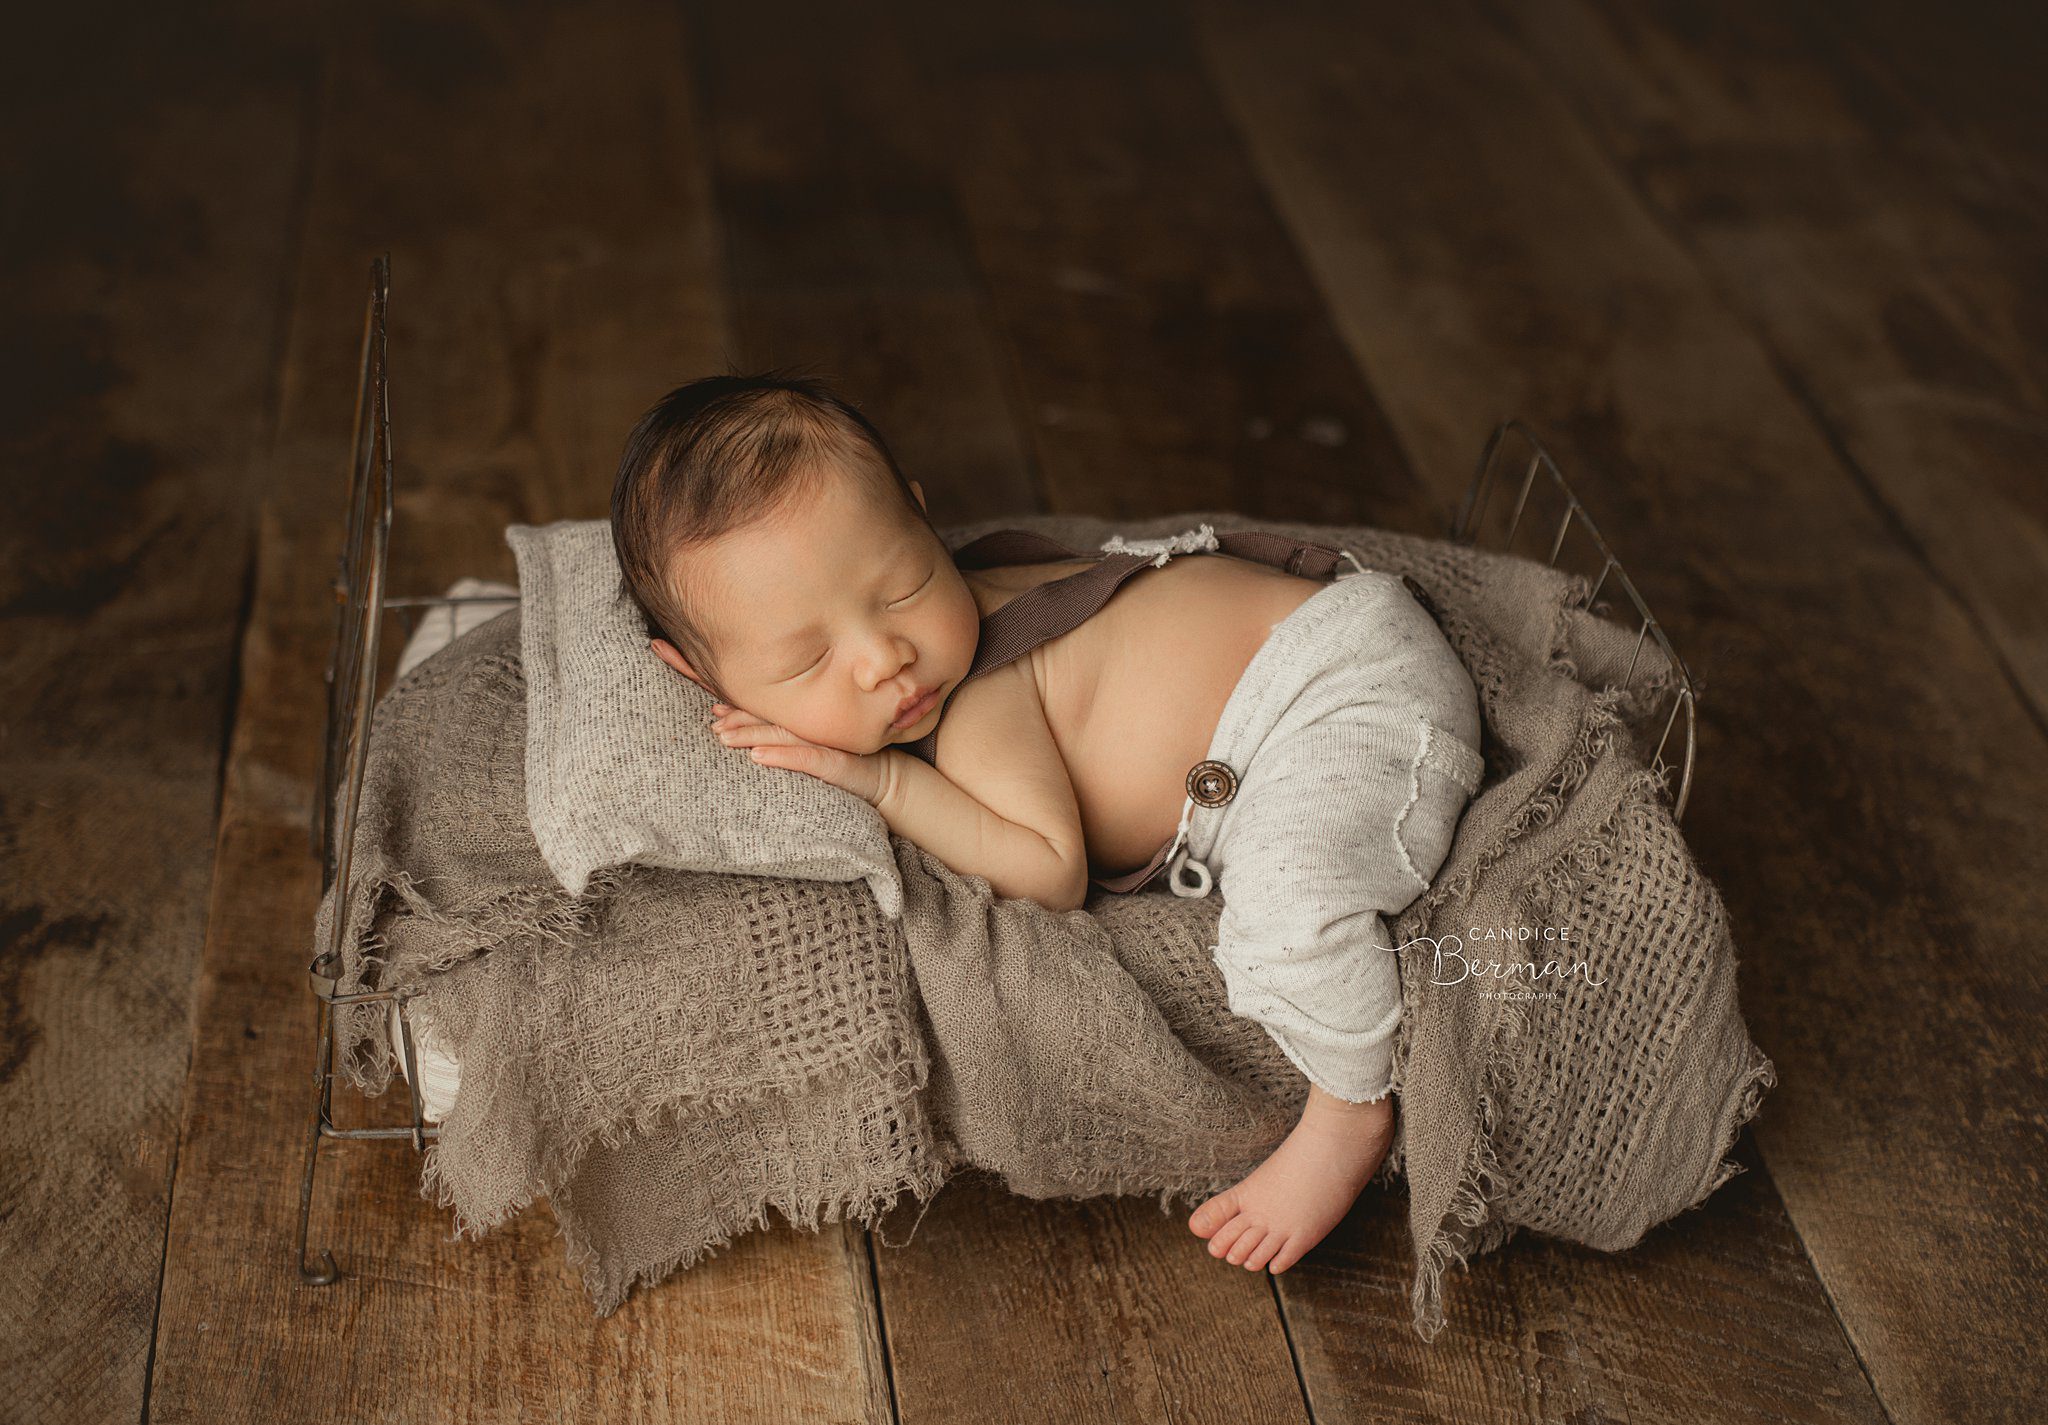 A newbown baby in grey pants and suspenders sleeps on a wire frame bed on hardwood floor in a studio